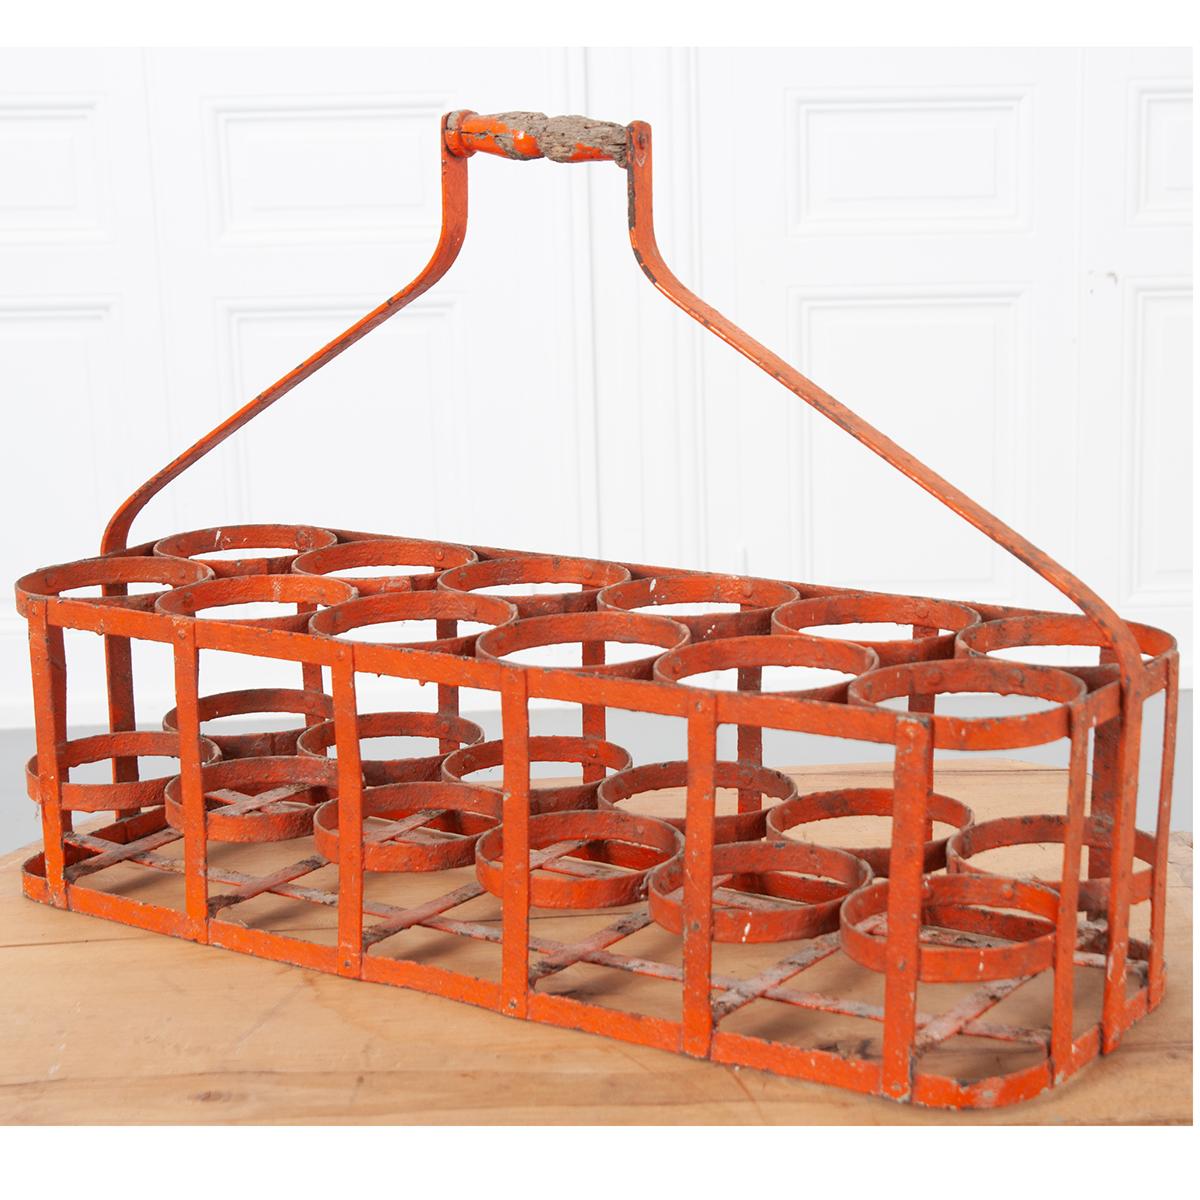 Early 20th century, circa 1900, 12 bottle carrier basket from France. Handmade bottle rack, made of metal with a wooden handle. Wonderful, aged patina gives this basket layers of character.